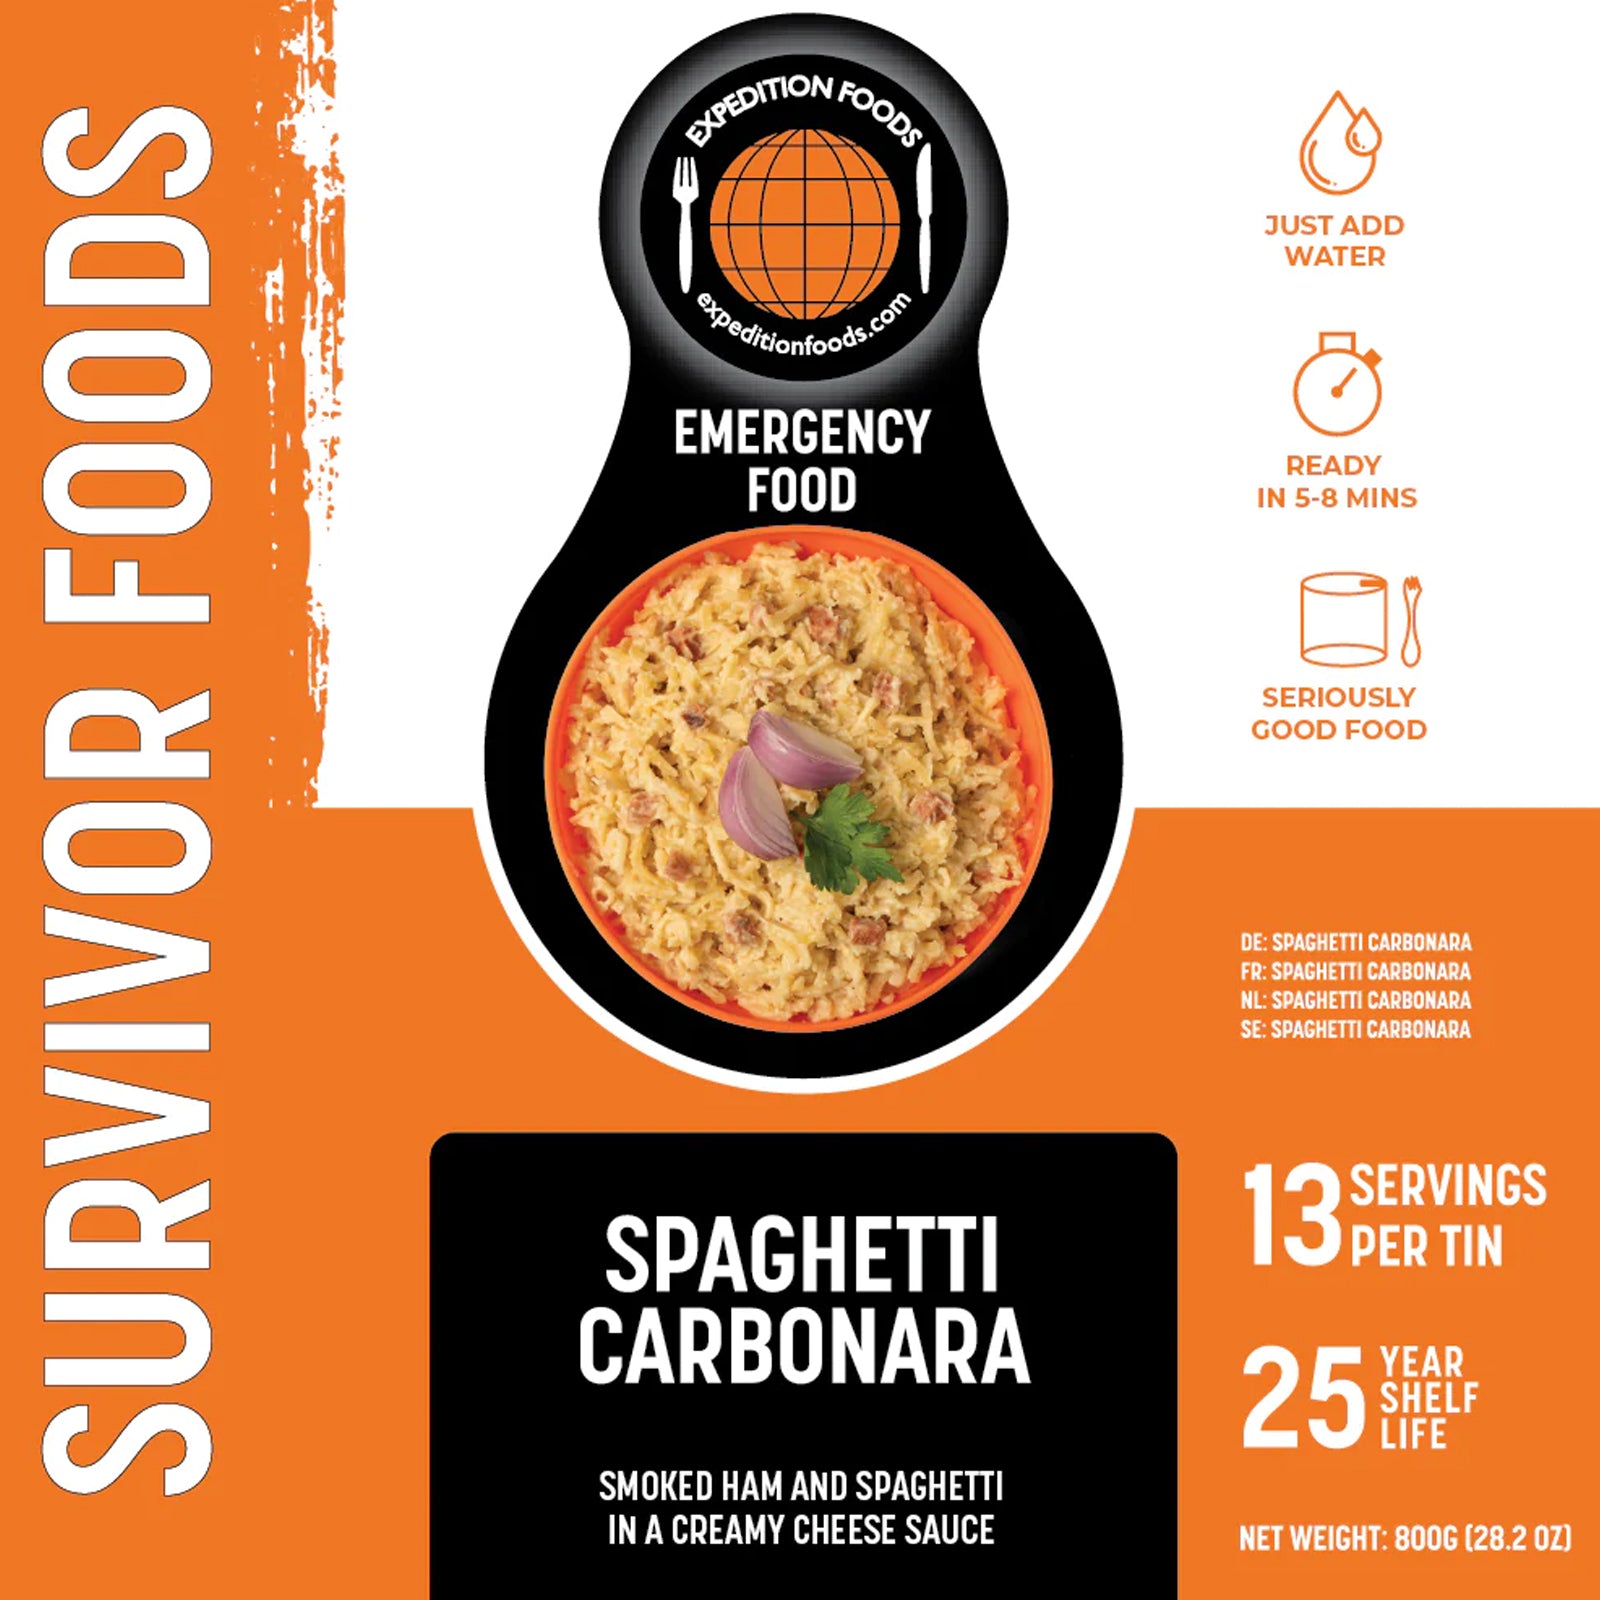 Expedition Foods Spaghetti Carbonara Meal Details